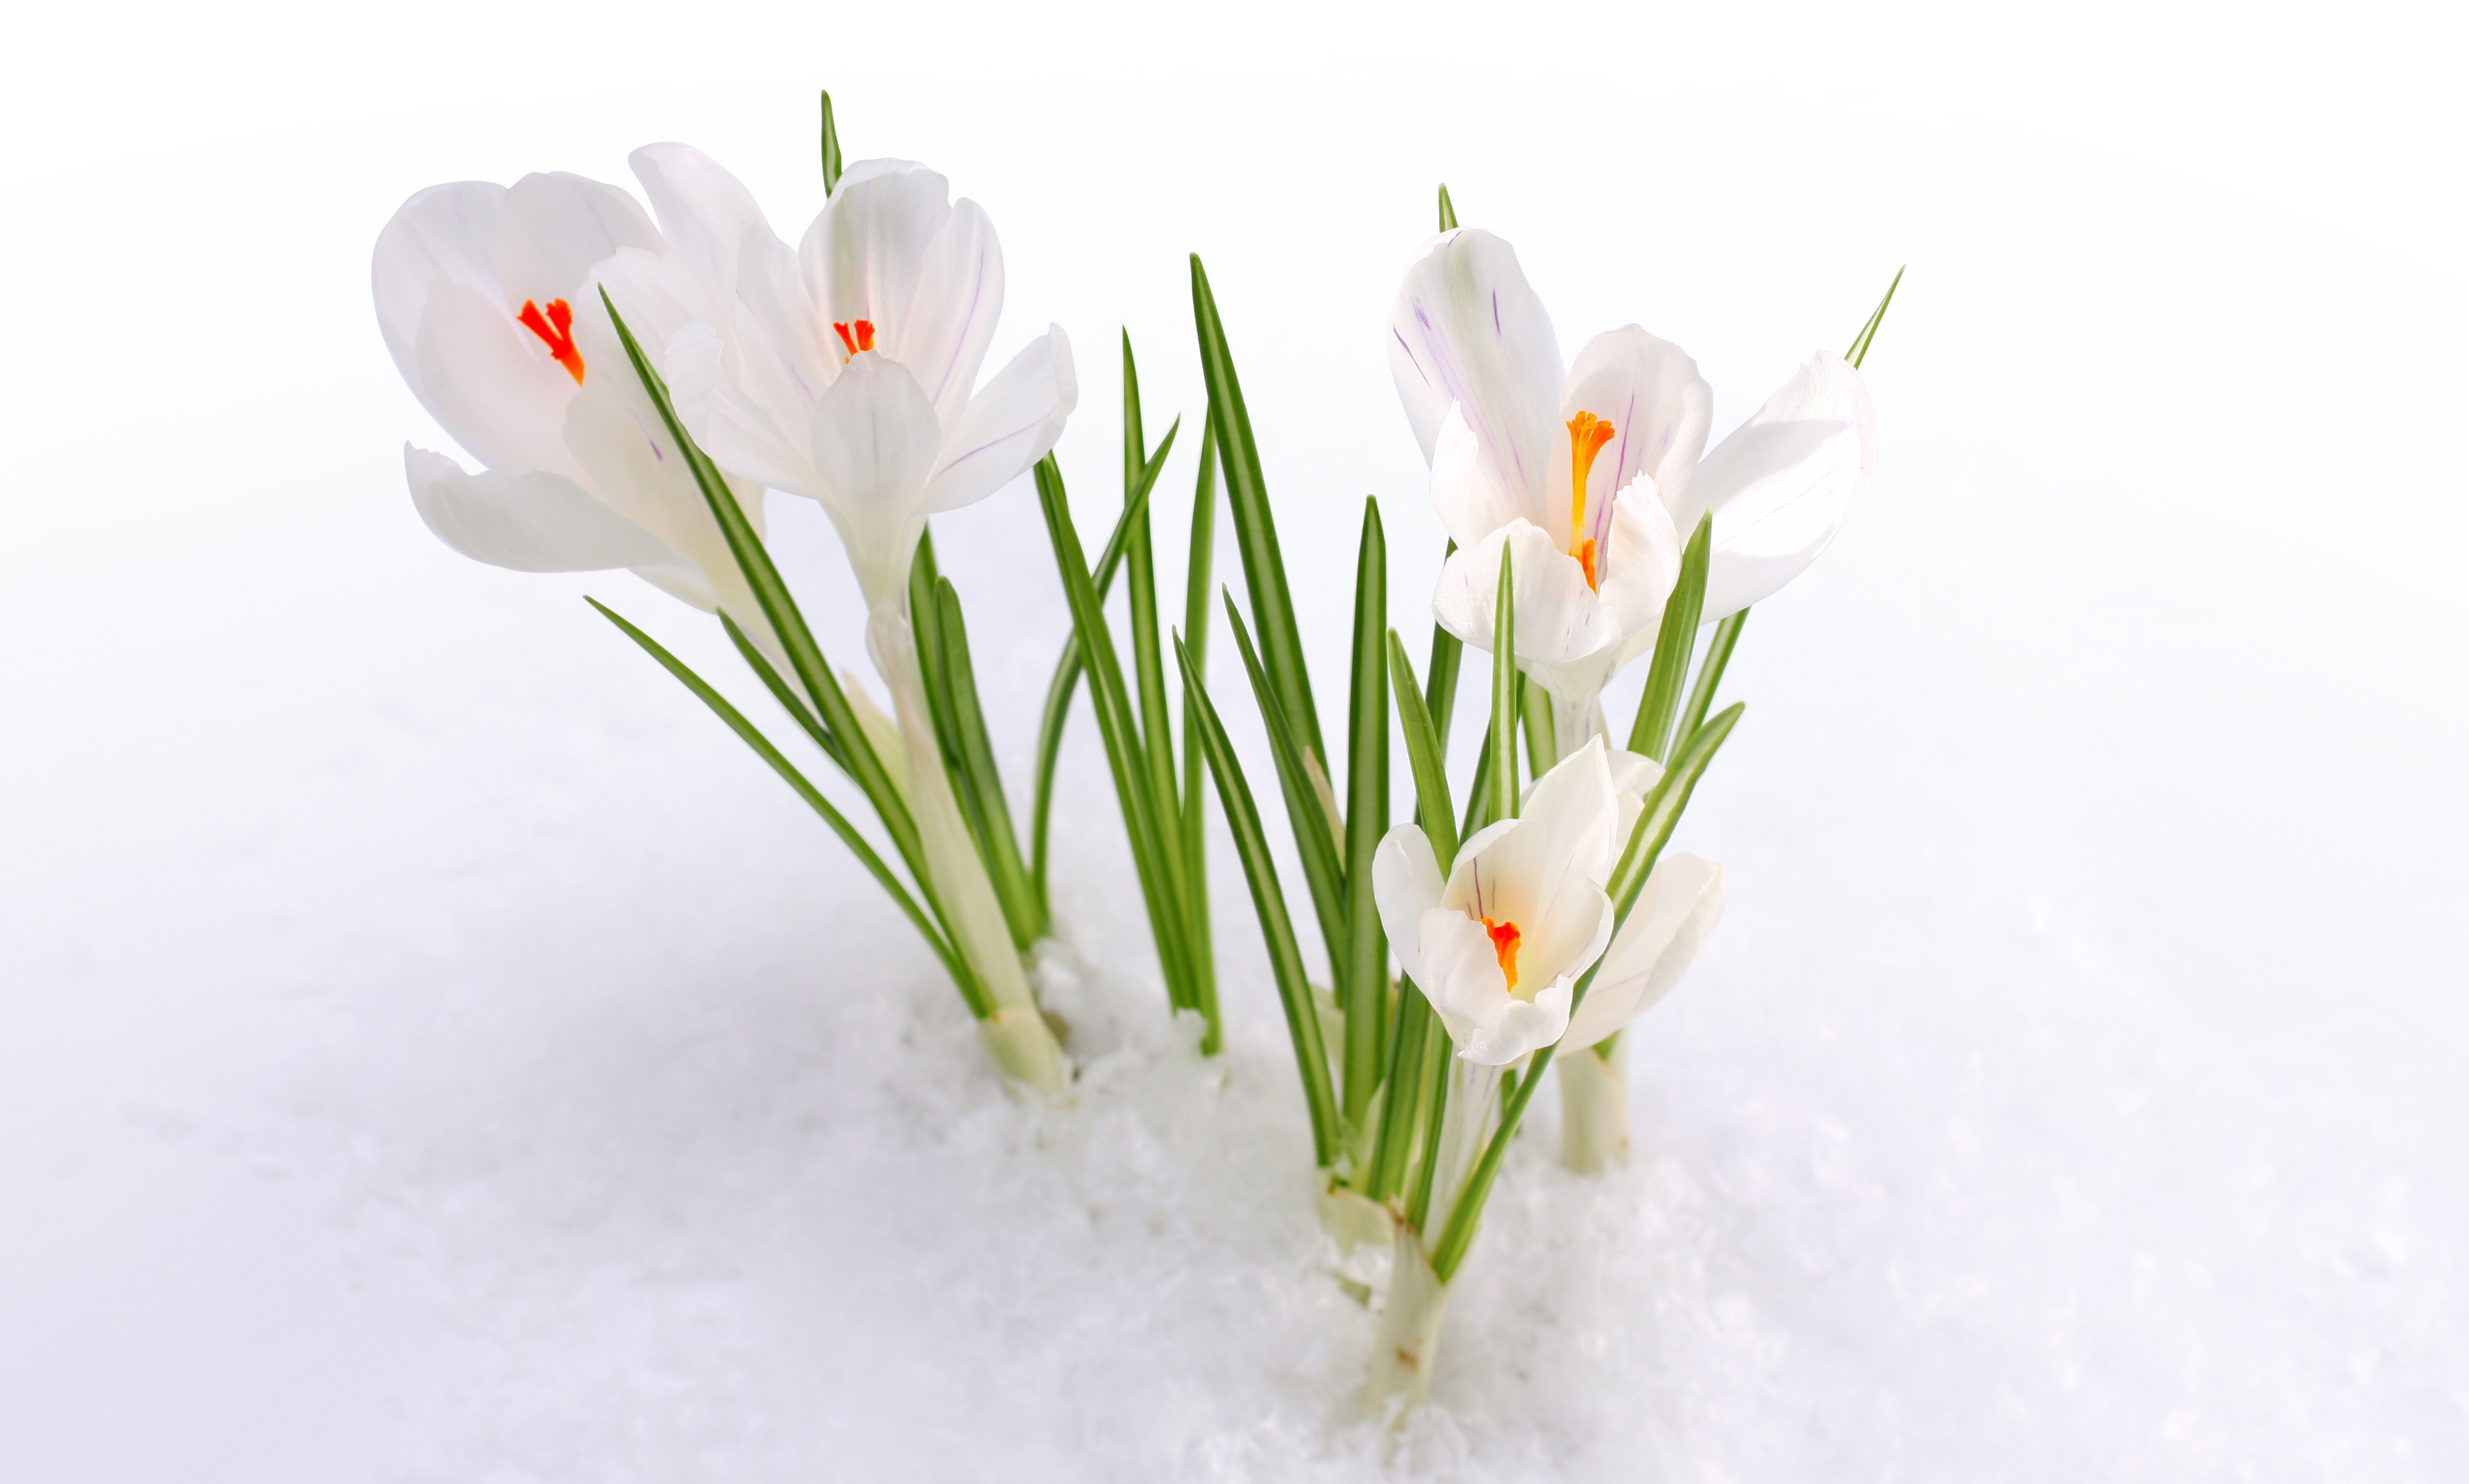 Snow, Snowdrops, Spring Flowers, Early Spring Wallpaper - С 1